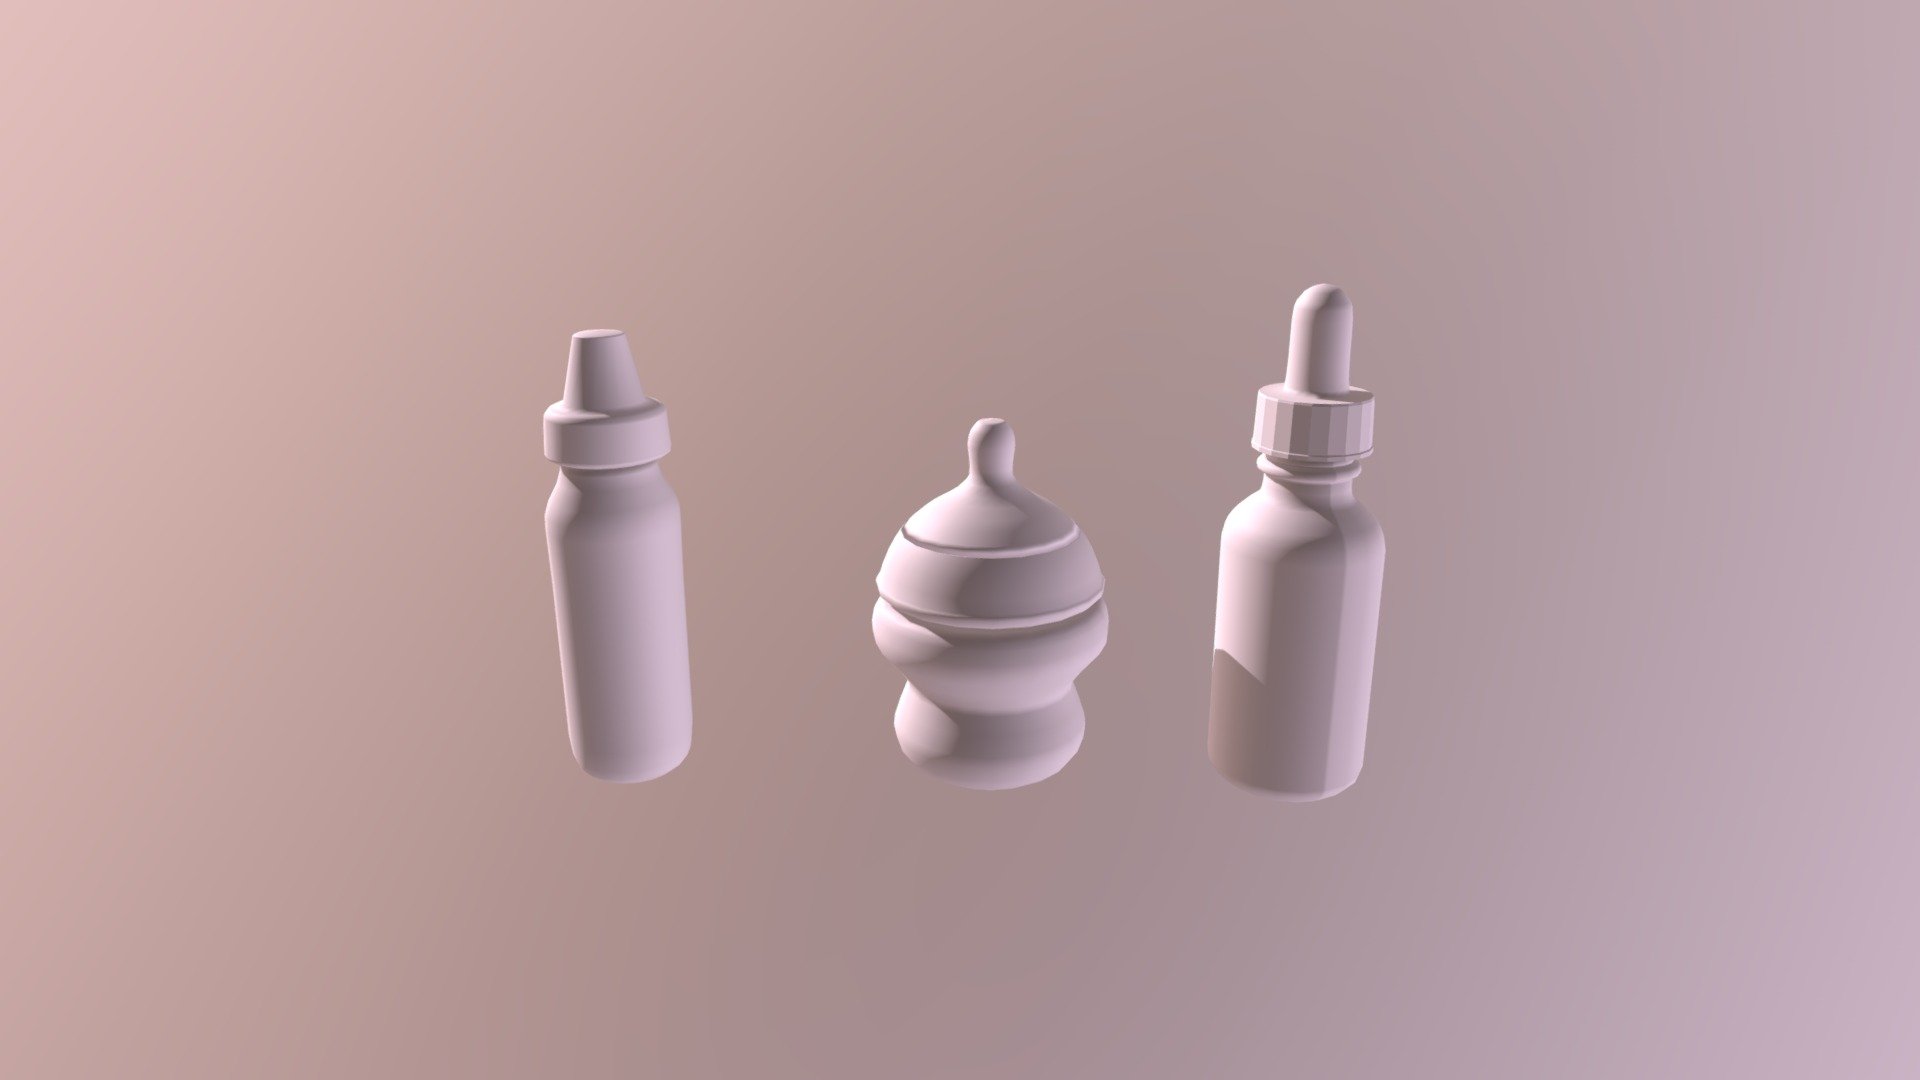 Here is my three bottle models. Two of them are baby bottles because I originally thought that all three of them had to be for babies until you showed us references. I modeled one of those references 3d model